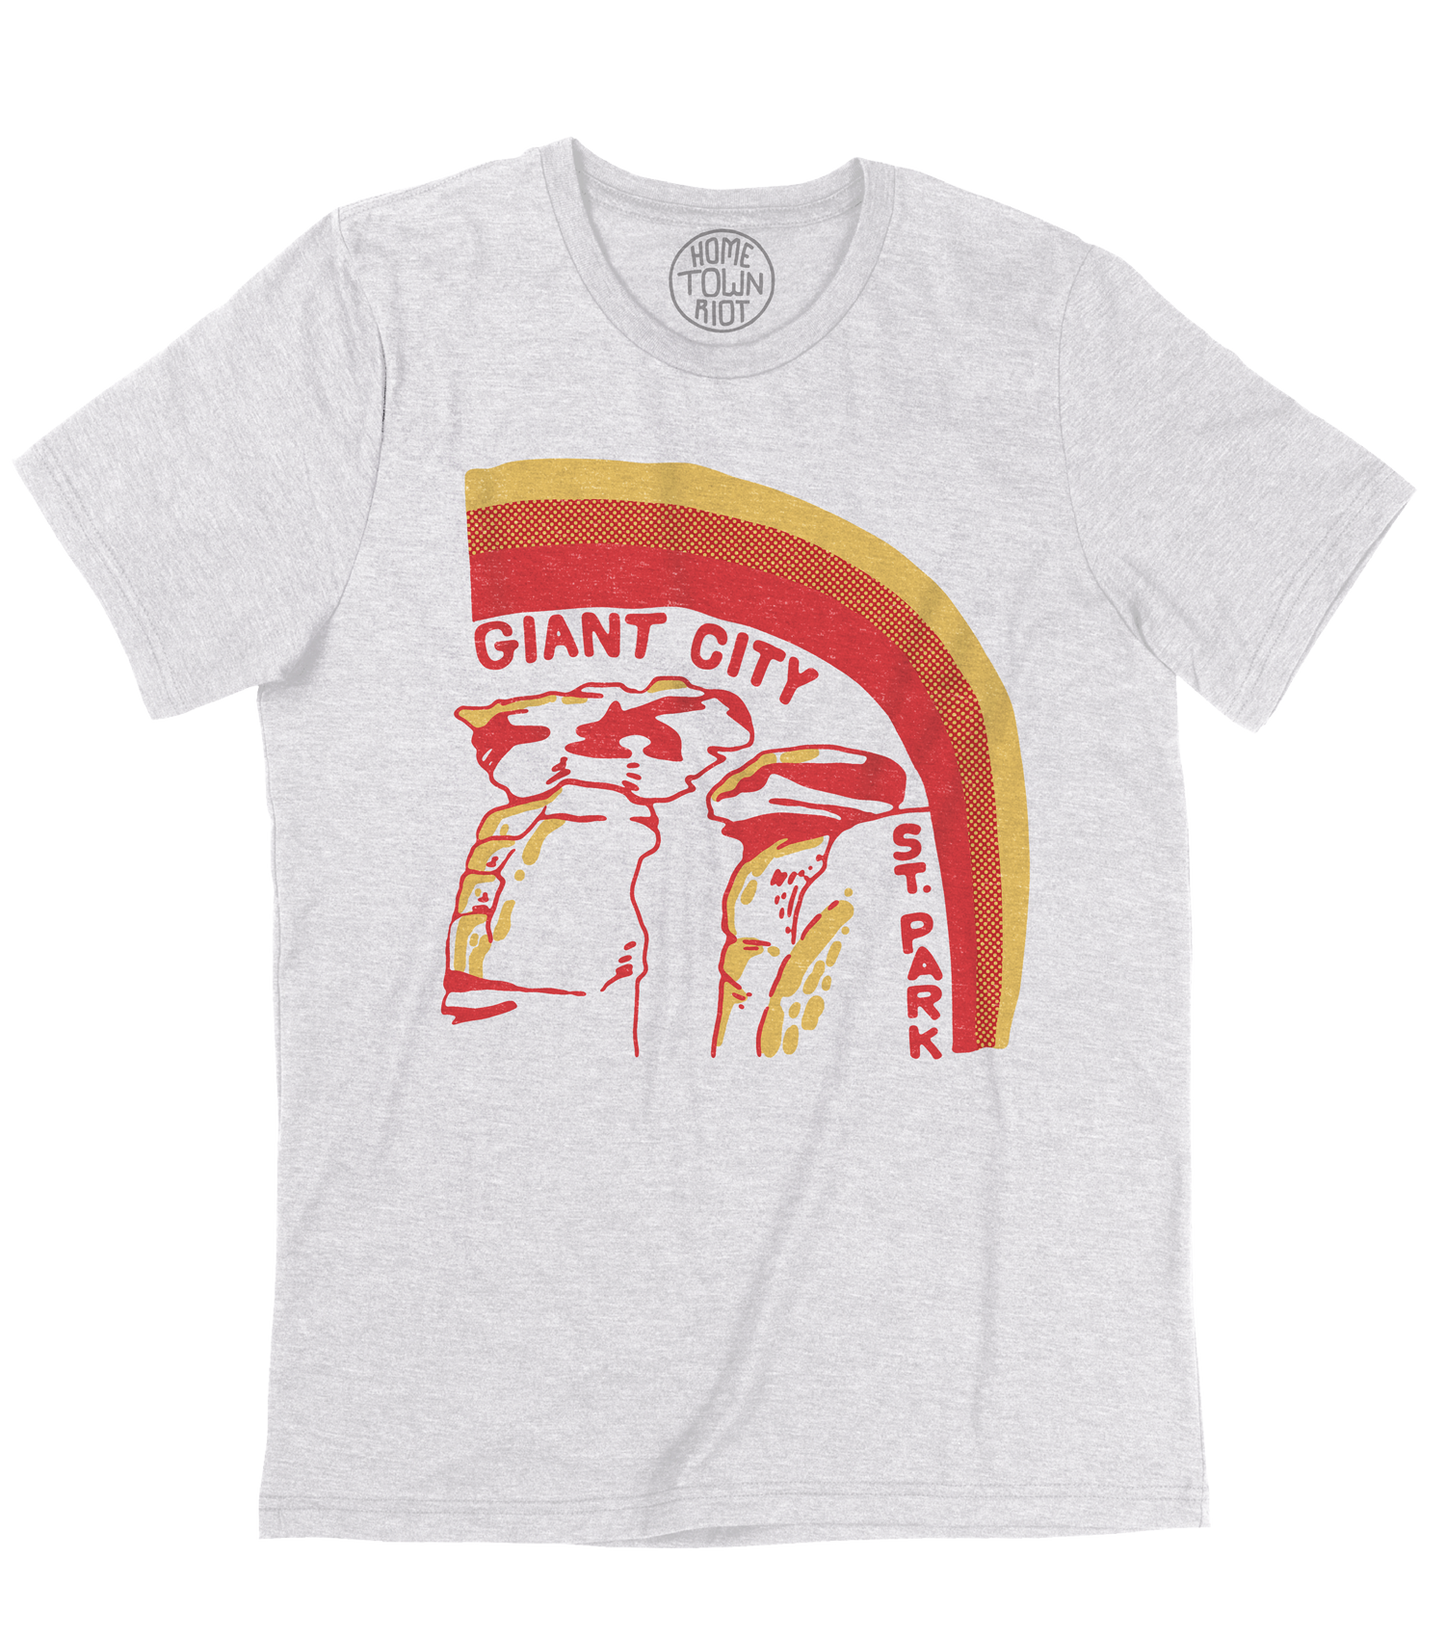 Giant City State Park Shirt